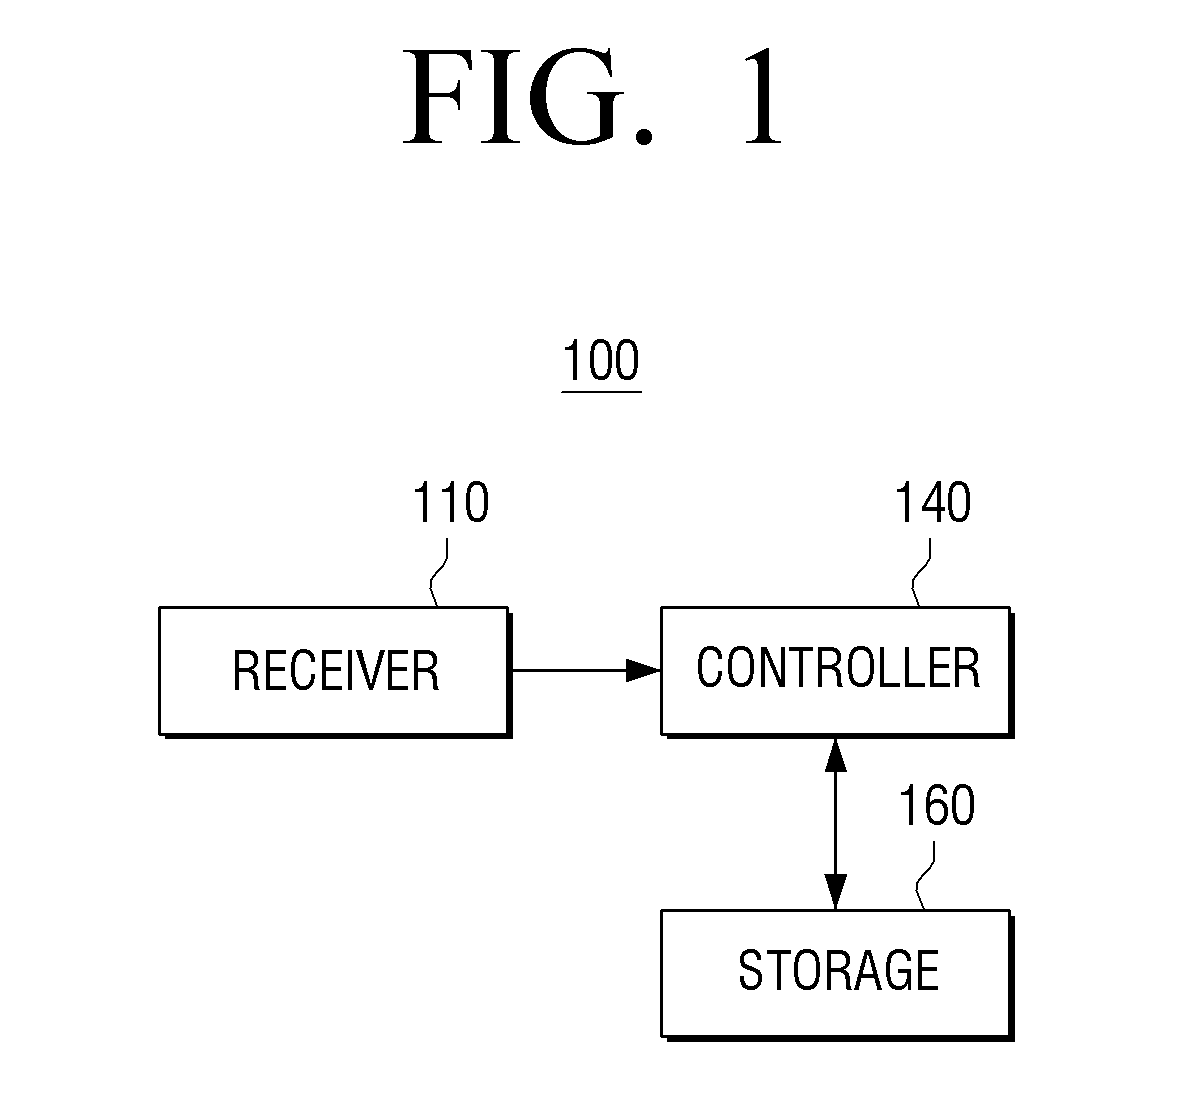 Display apparatus and method for providing personalized service thereof